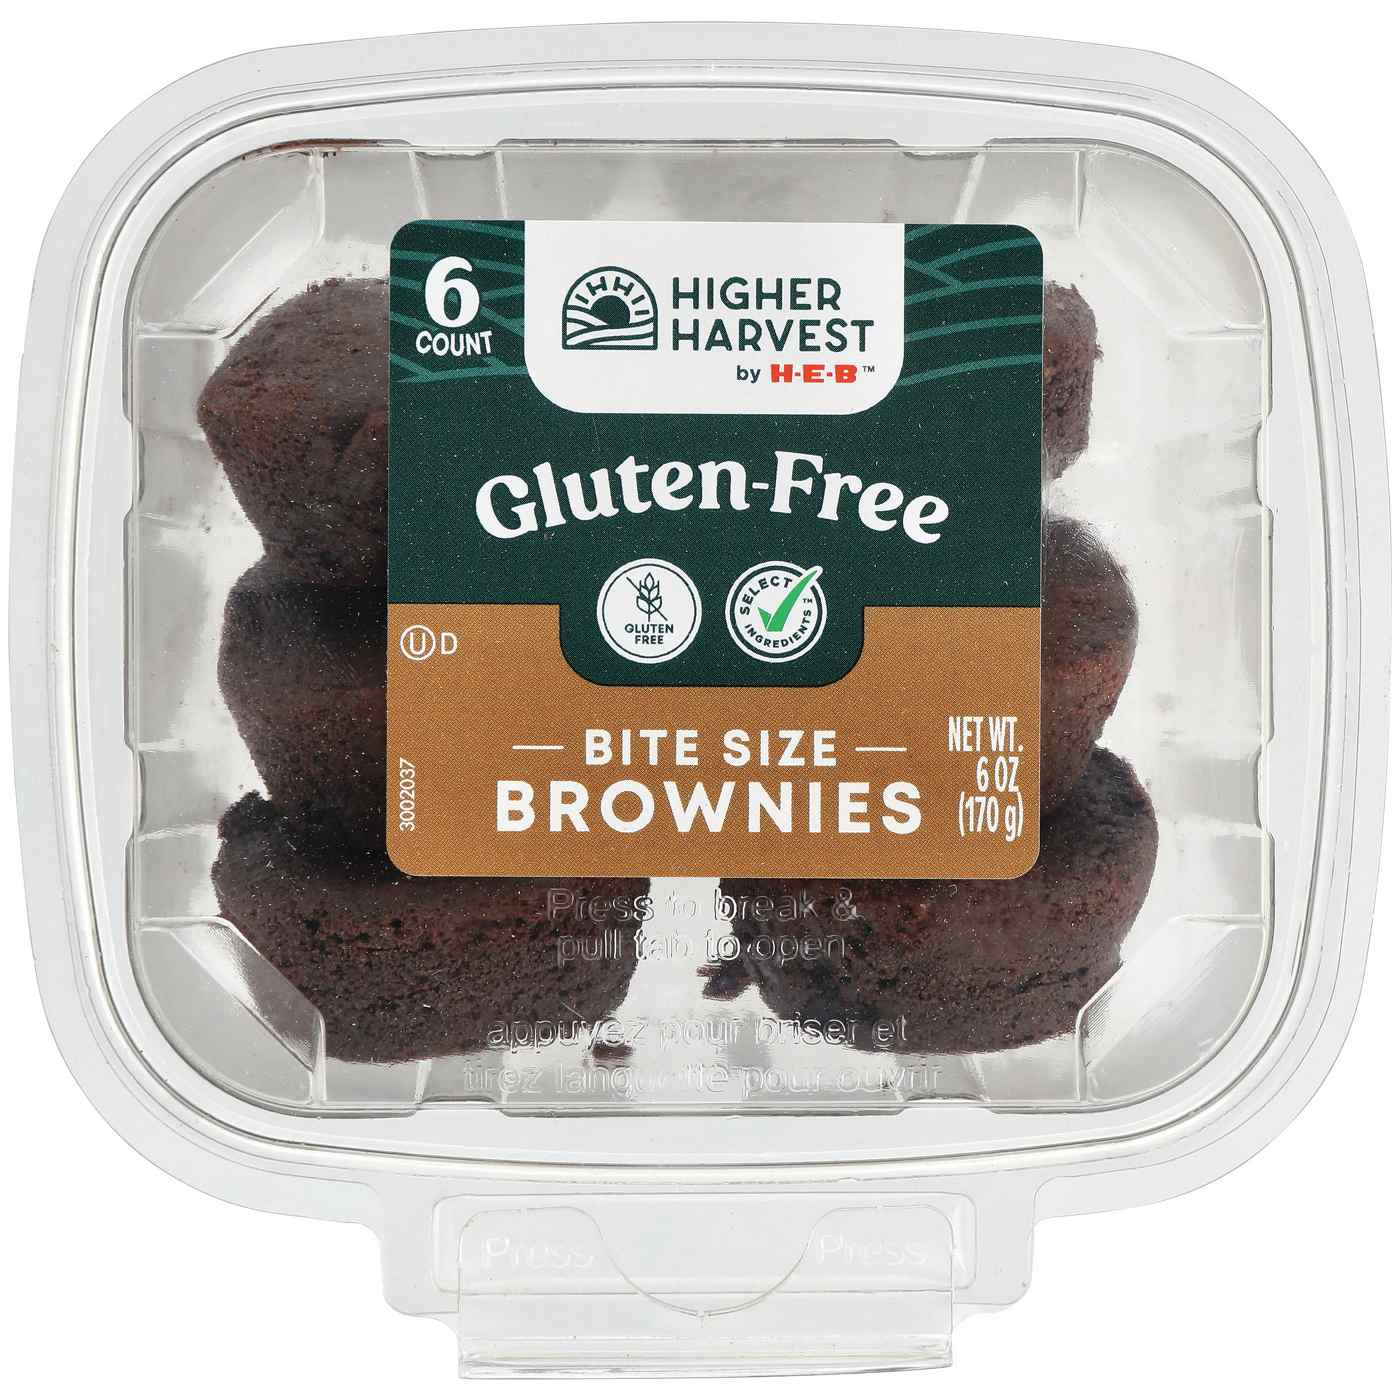 Higher Harvest by H-E-B Gluten-Free Bite Size Brownies; image 1 of 3